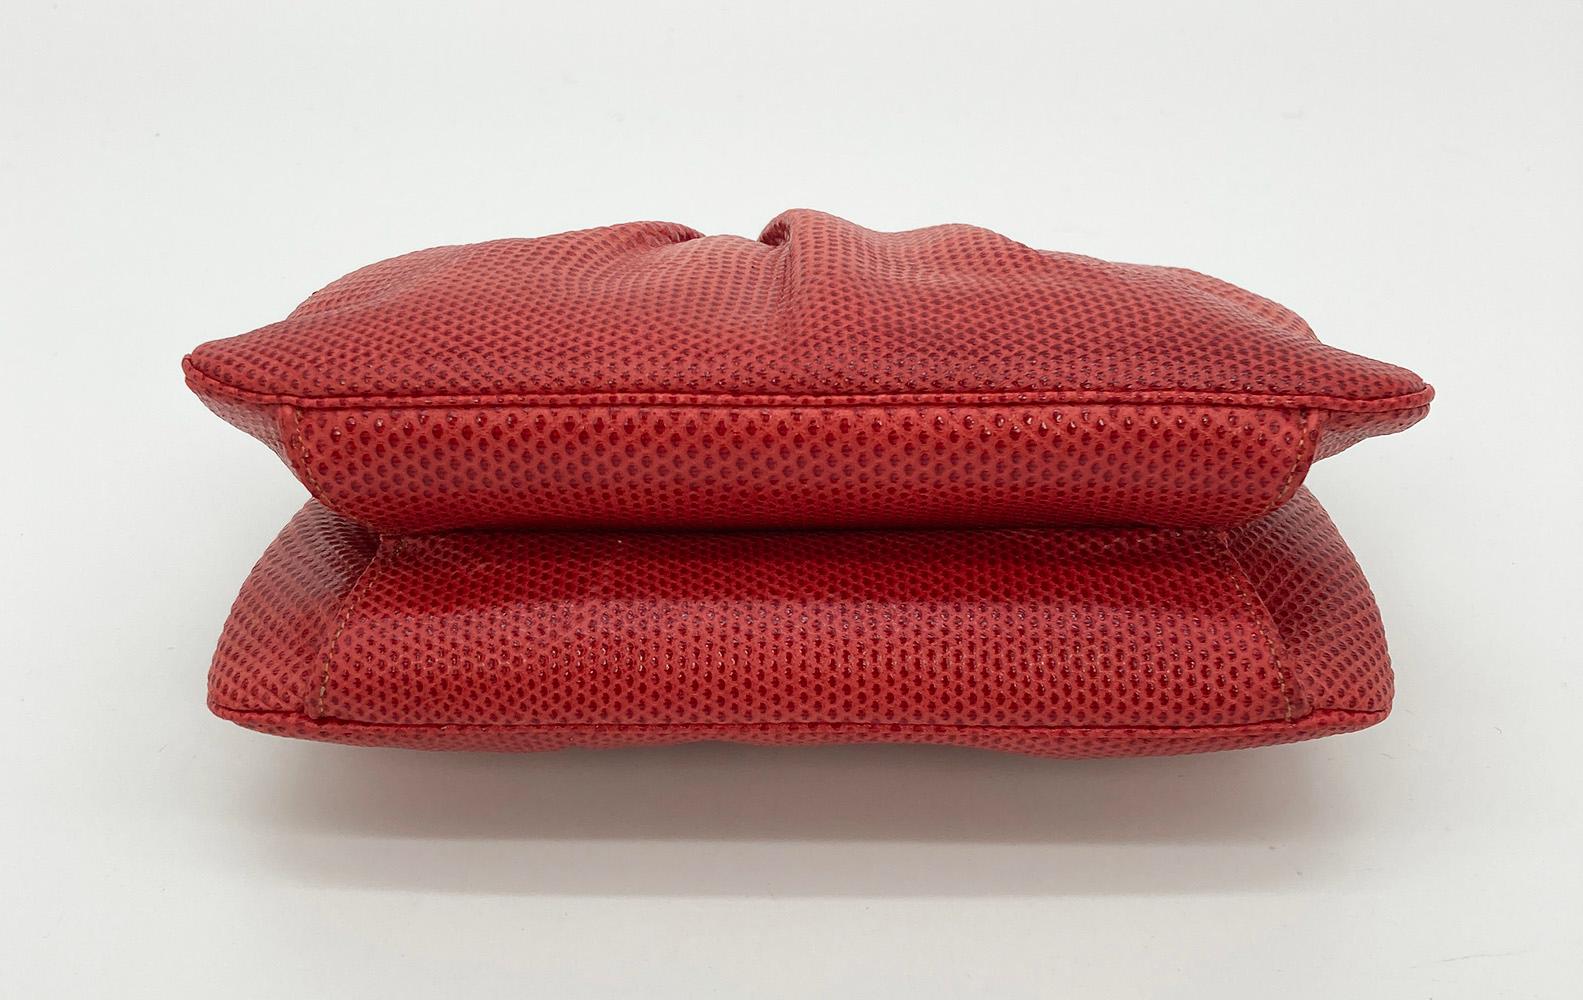 Judith Leiber Red Lizard Clutch In Good Condition For Sale In Philadelphia, PA